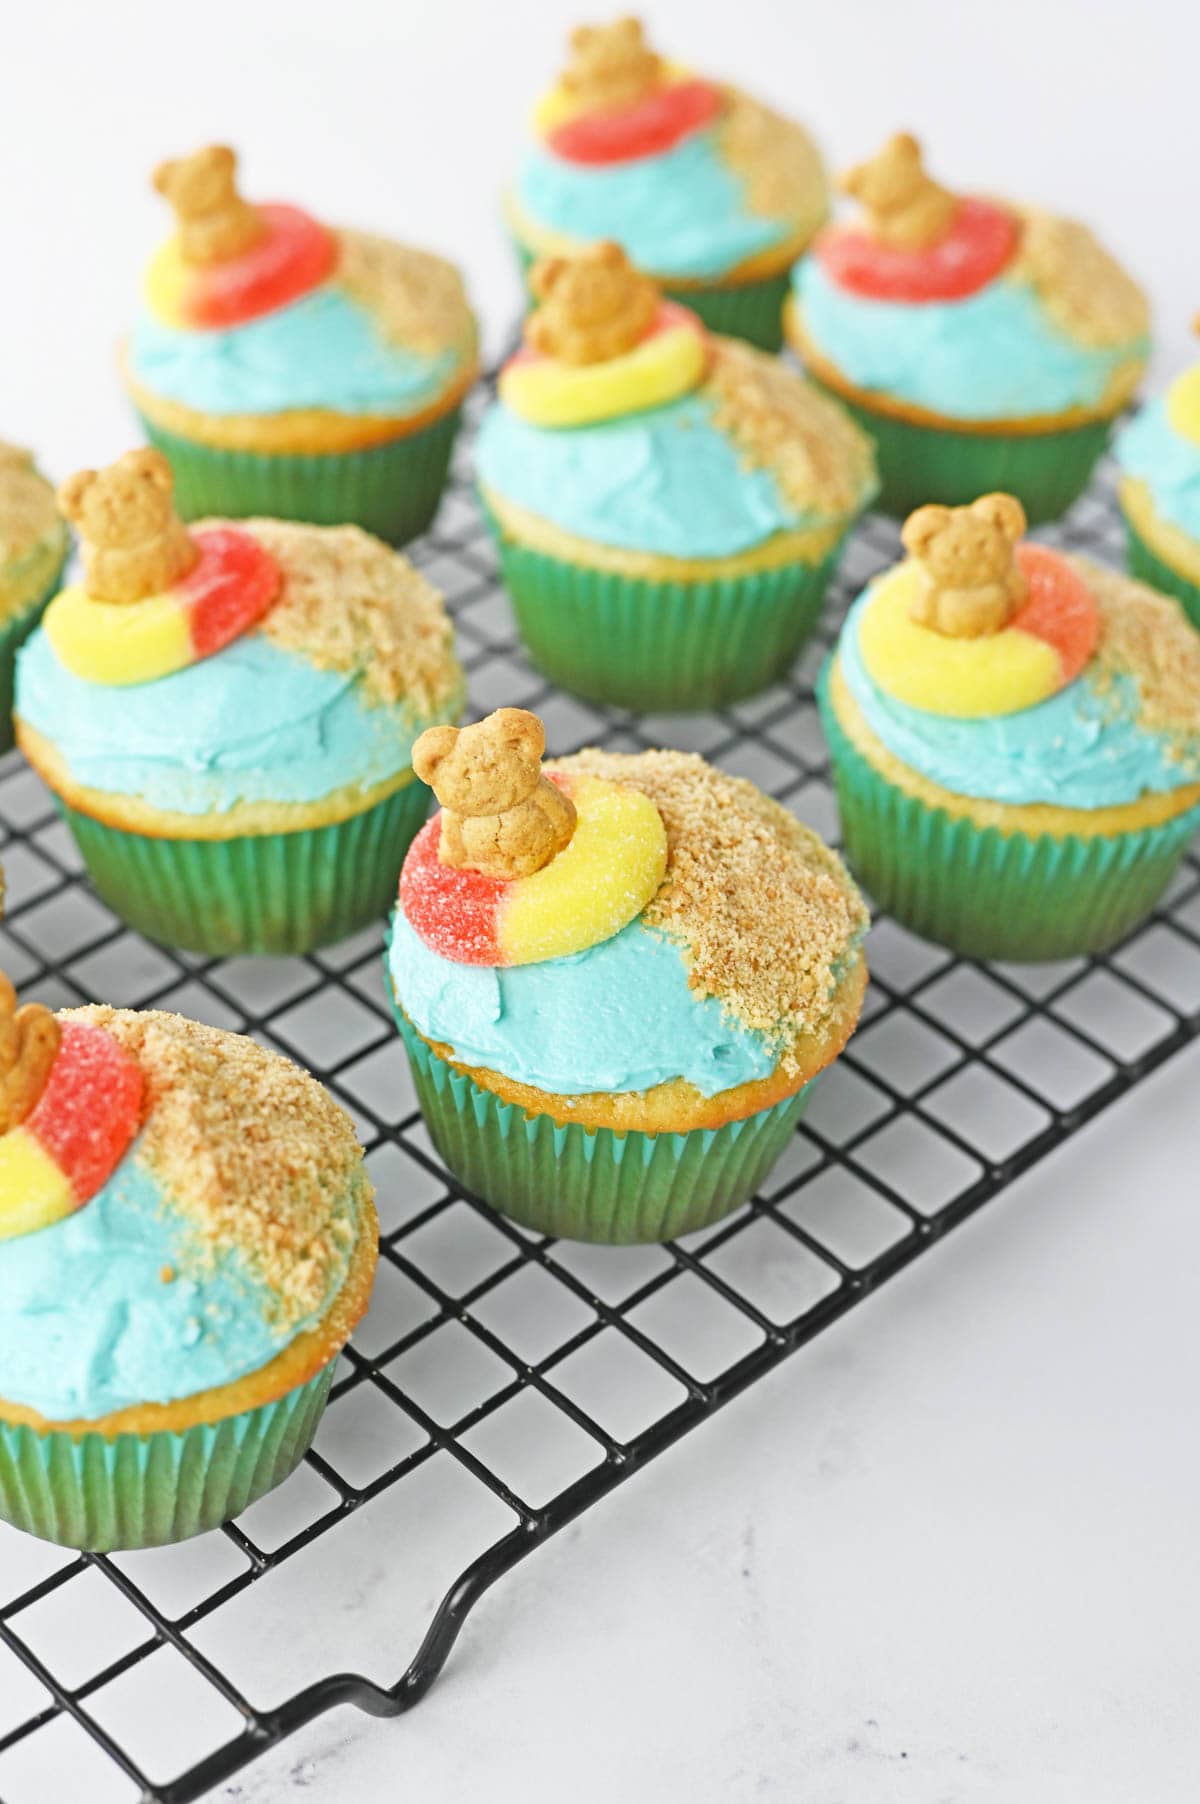 Teddy grahams in ring candies on top of cupcakes